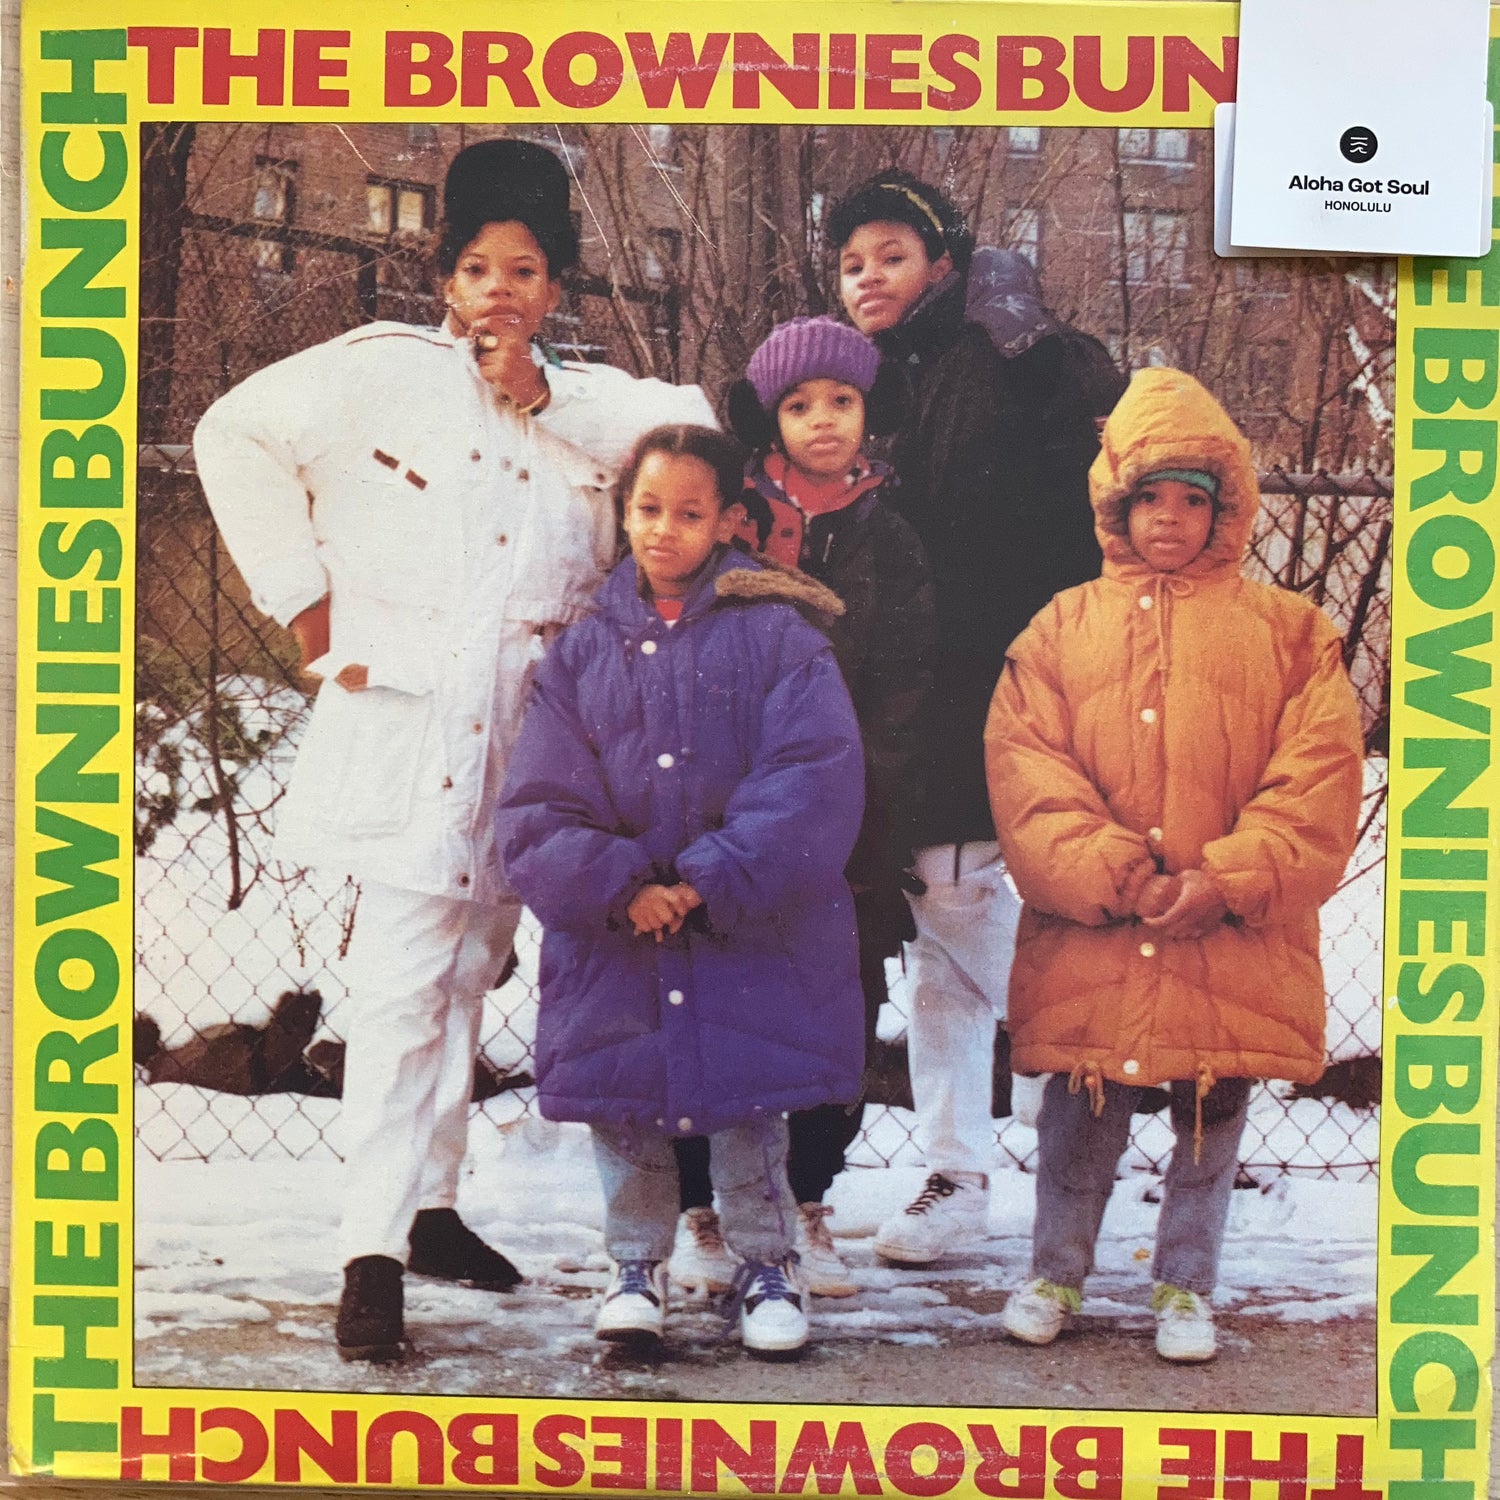 The Brownies Bunch - S/T